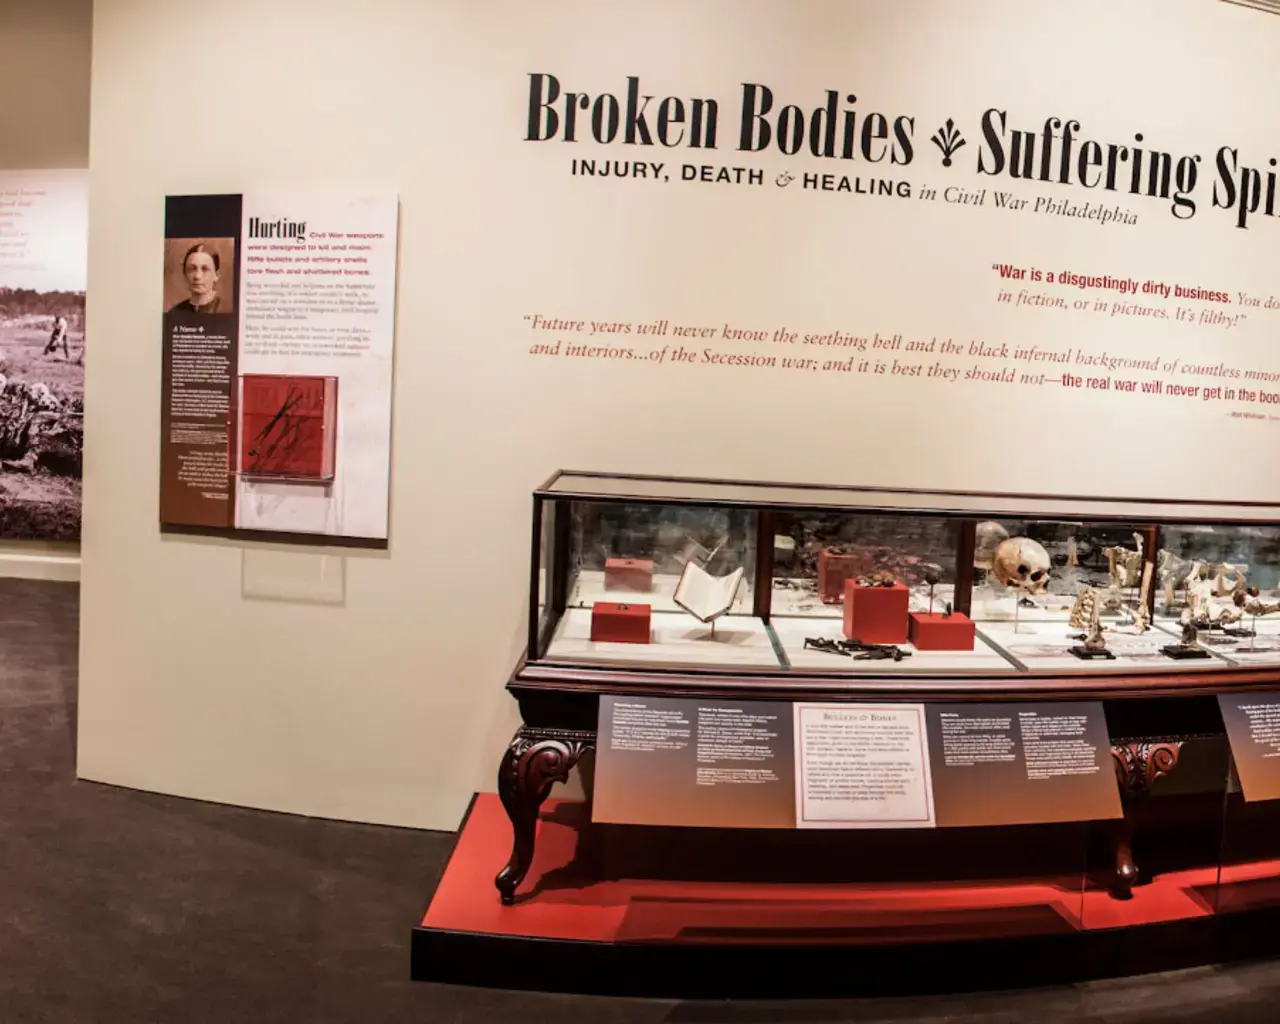 Broken Bodies, Suffering Spirits: Injury, Death, and Healing in Civil War Philadelphia, an exhibition documenting the human experience of war through four topics: hurting, healing, dying, and fighting, illustrated with original artifacts, texts, and human specimens from the American Civil War. Mütter Museum, Mütter Gallery, 2013. Photo by Evi Numen.